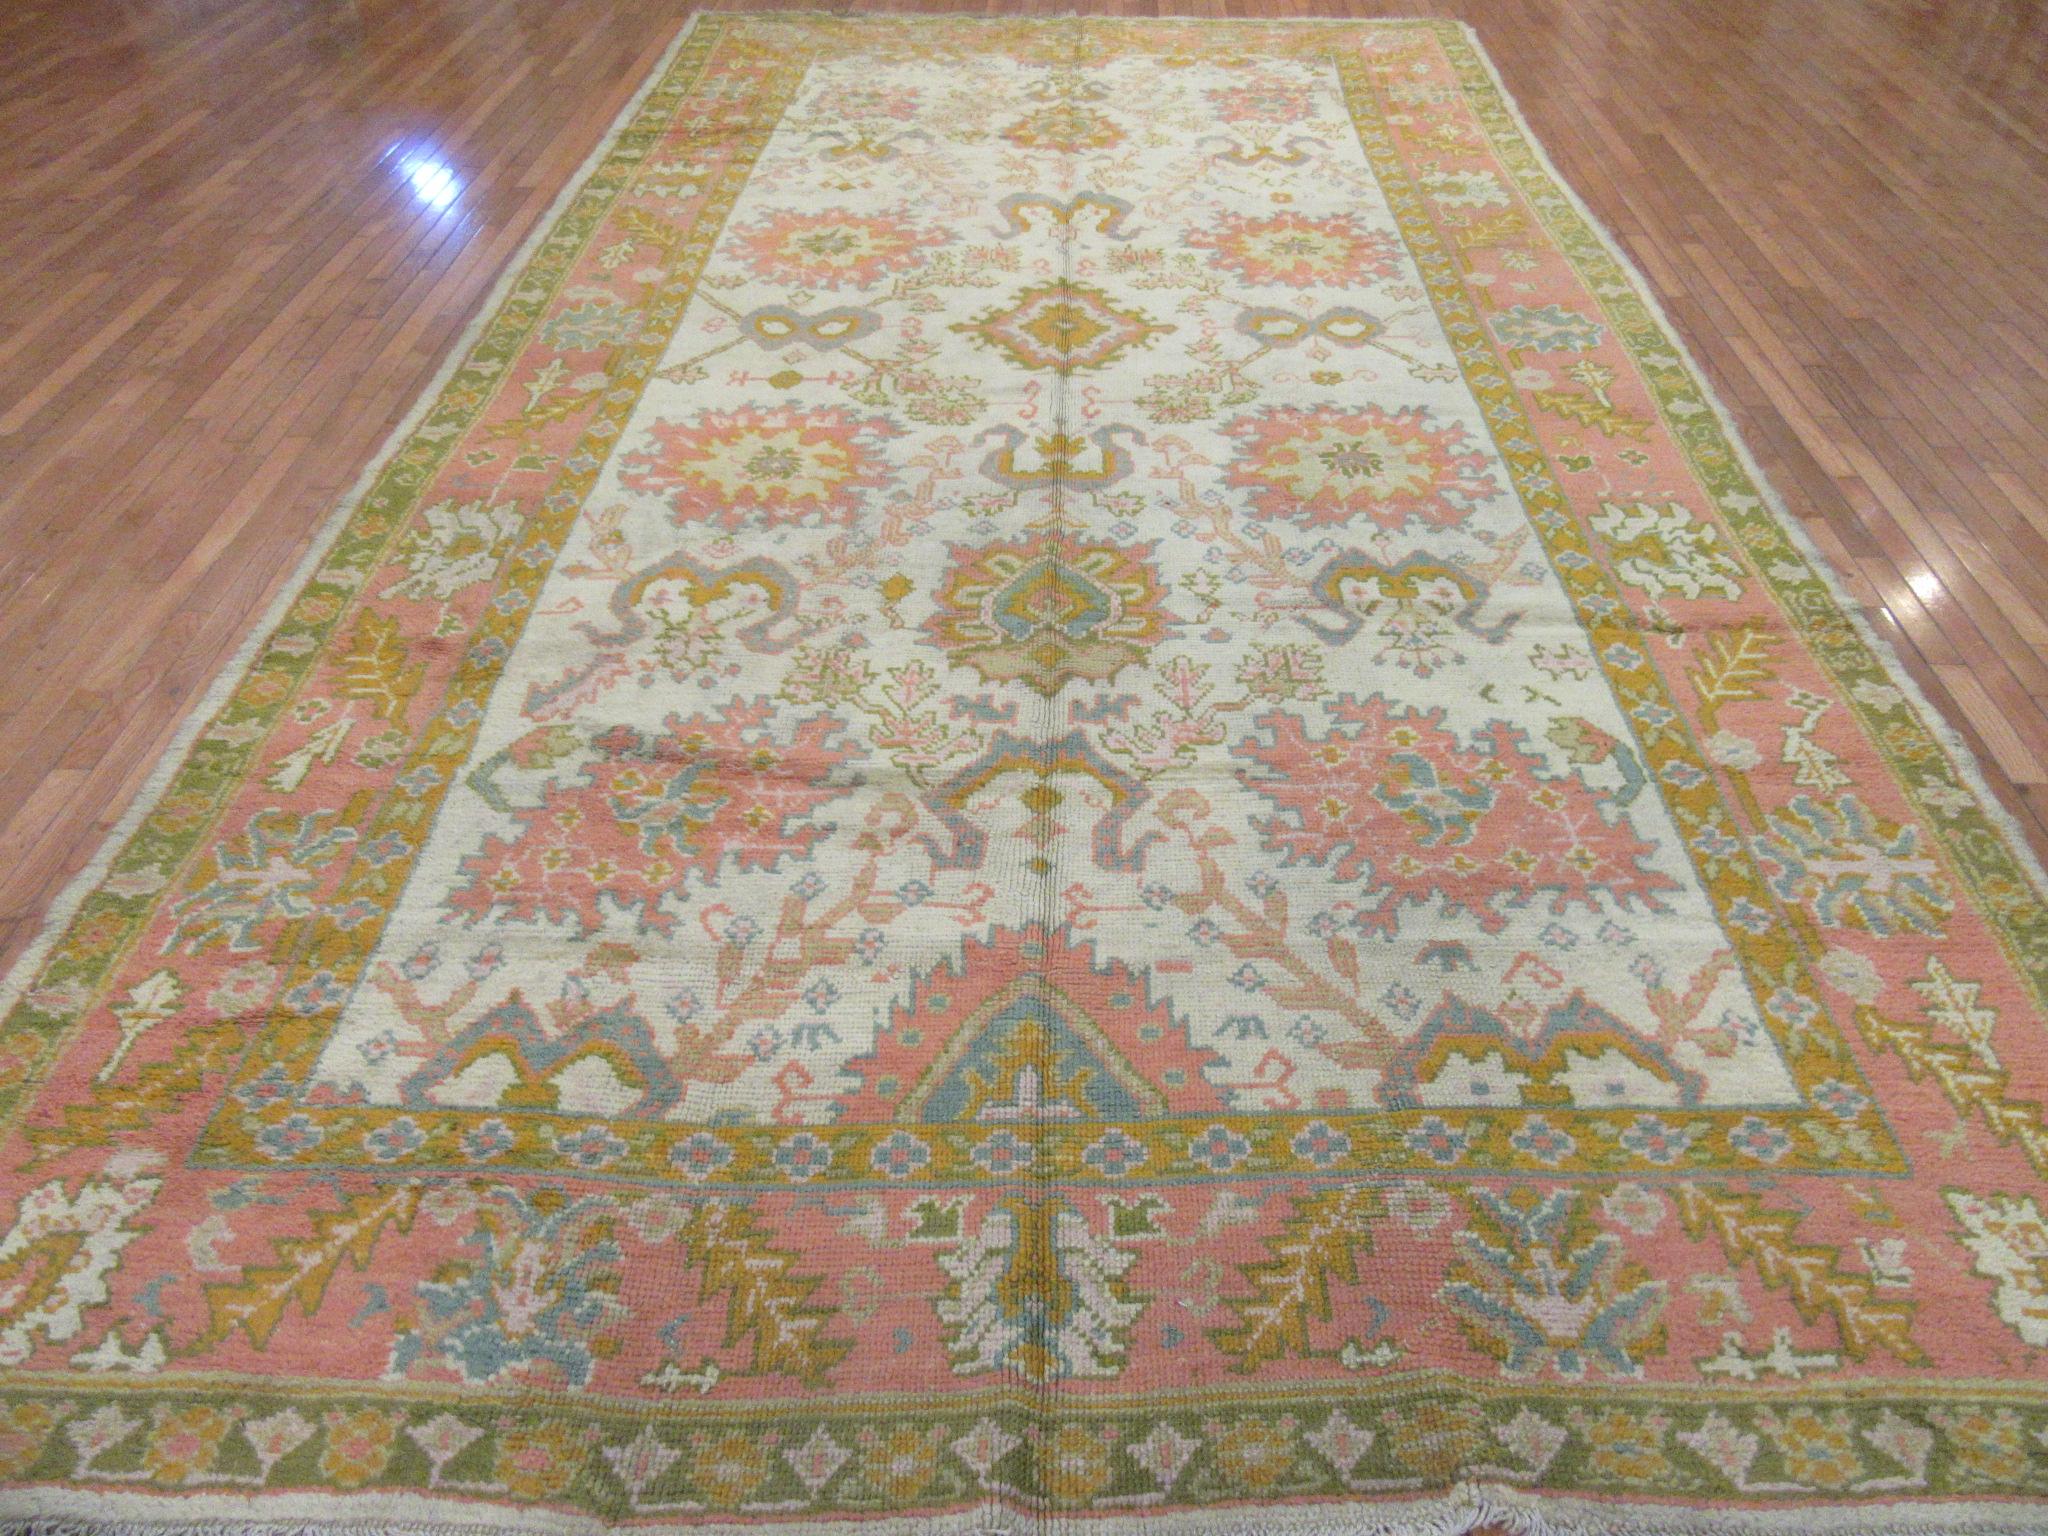 A beautiful example of the antique Turkish Oushak rugs in a hard to find wide gallery size. The rug has a simple all-over pattern on an ivory color field and salmon color border. It is in great condition. It measures 8' 6'' x 16'